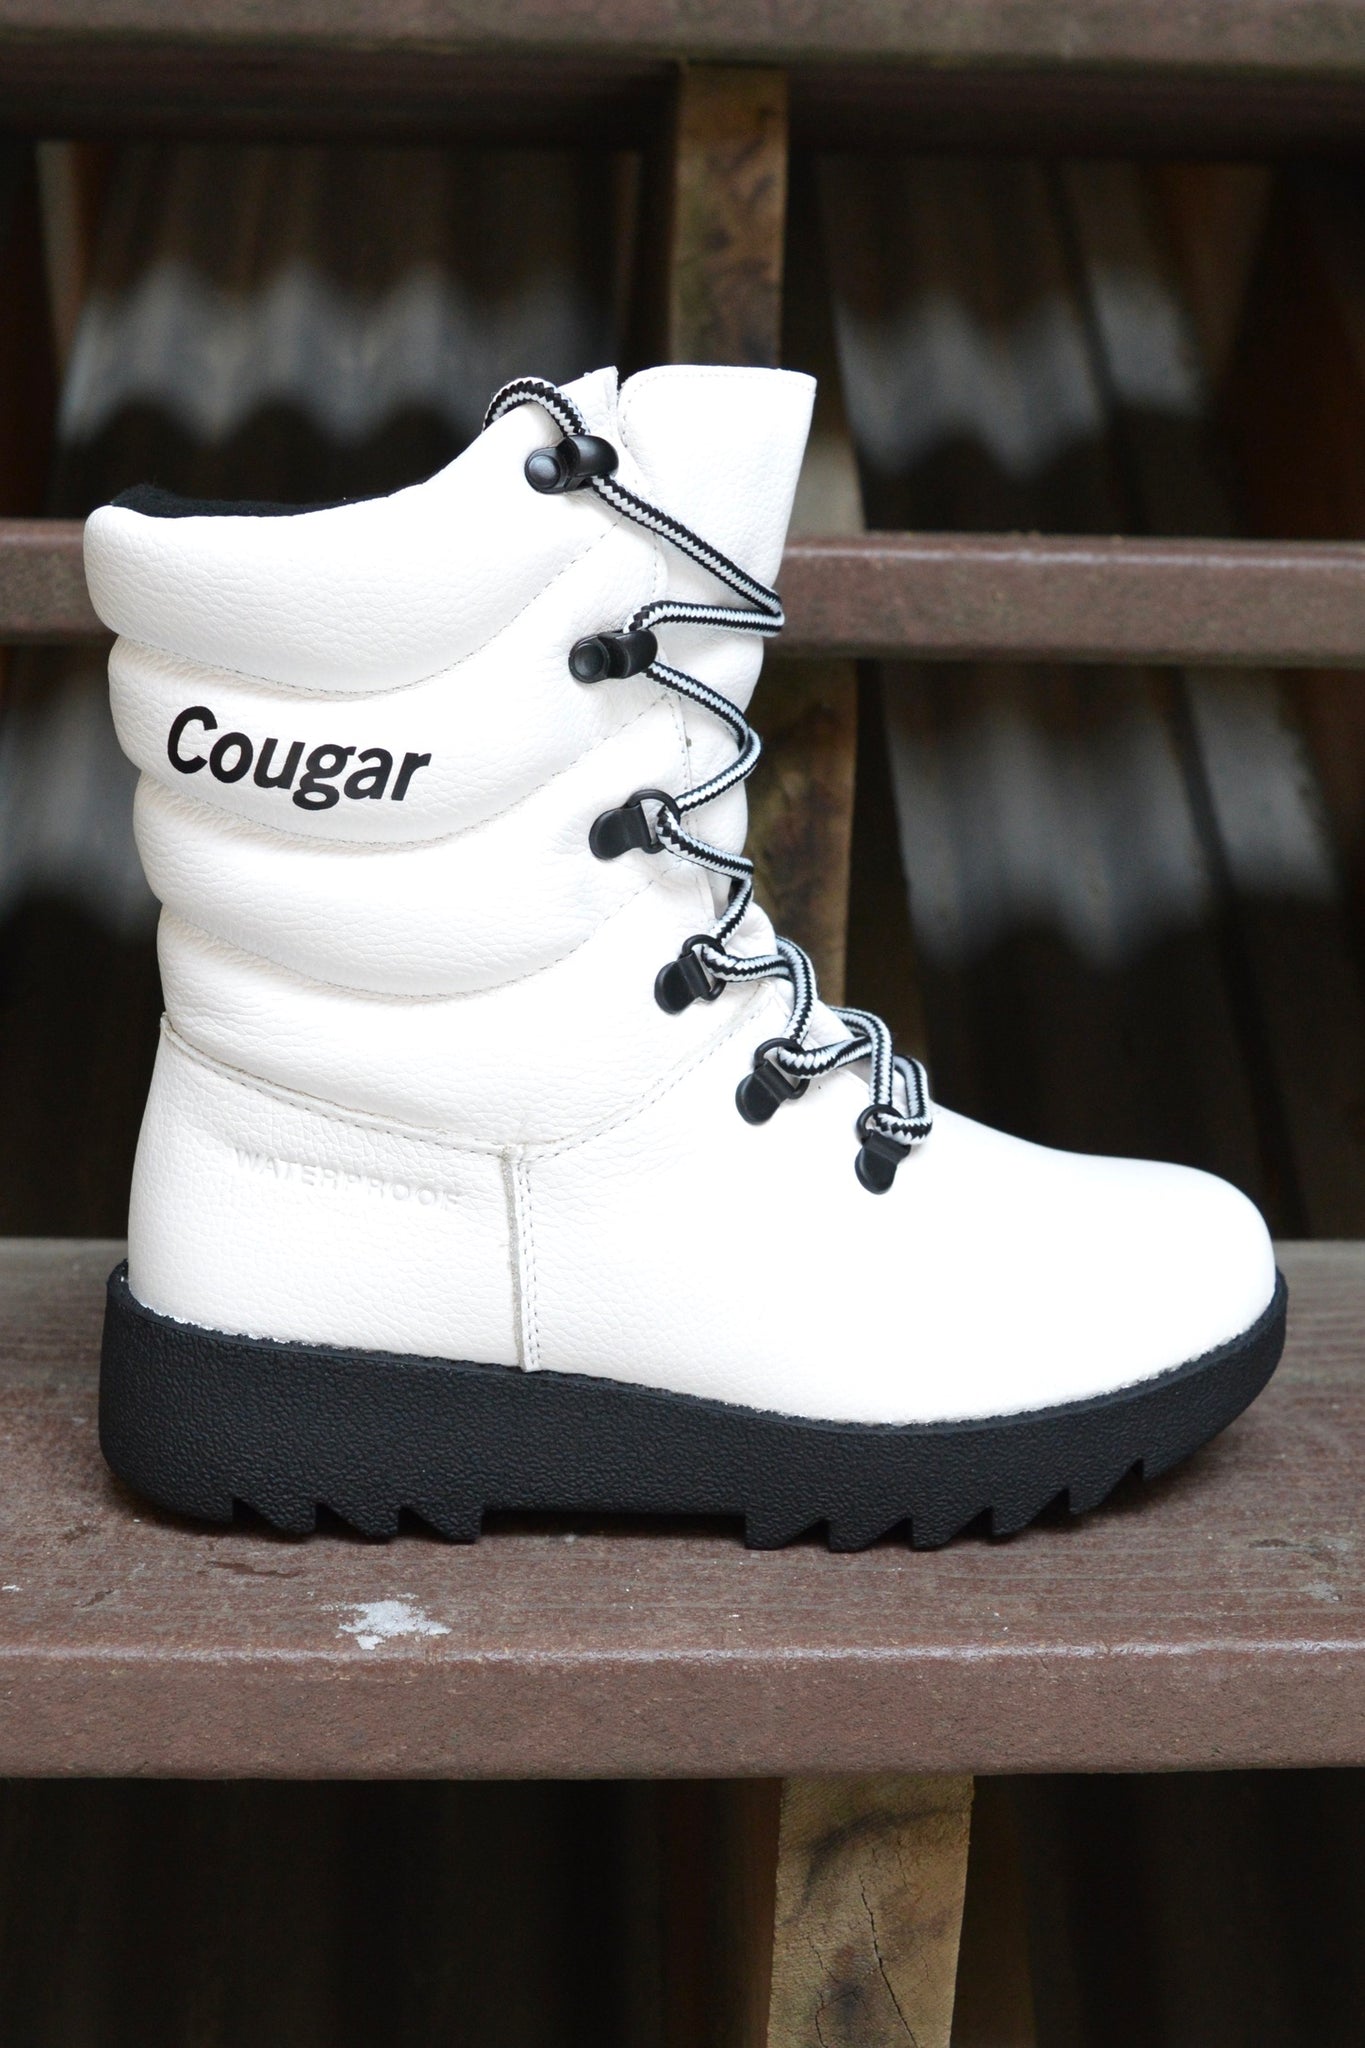 Cougar Original Size 6 only